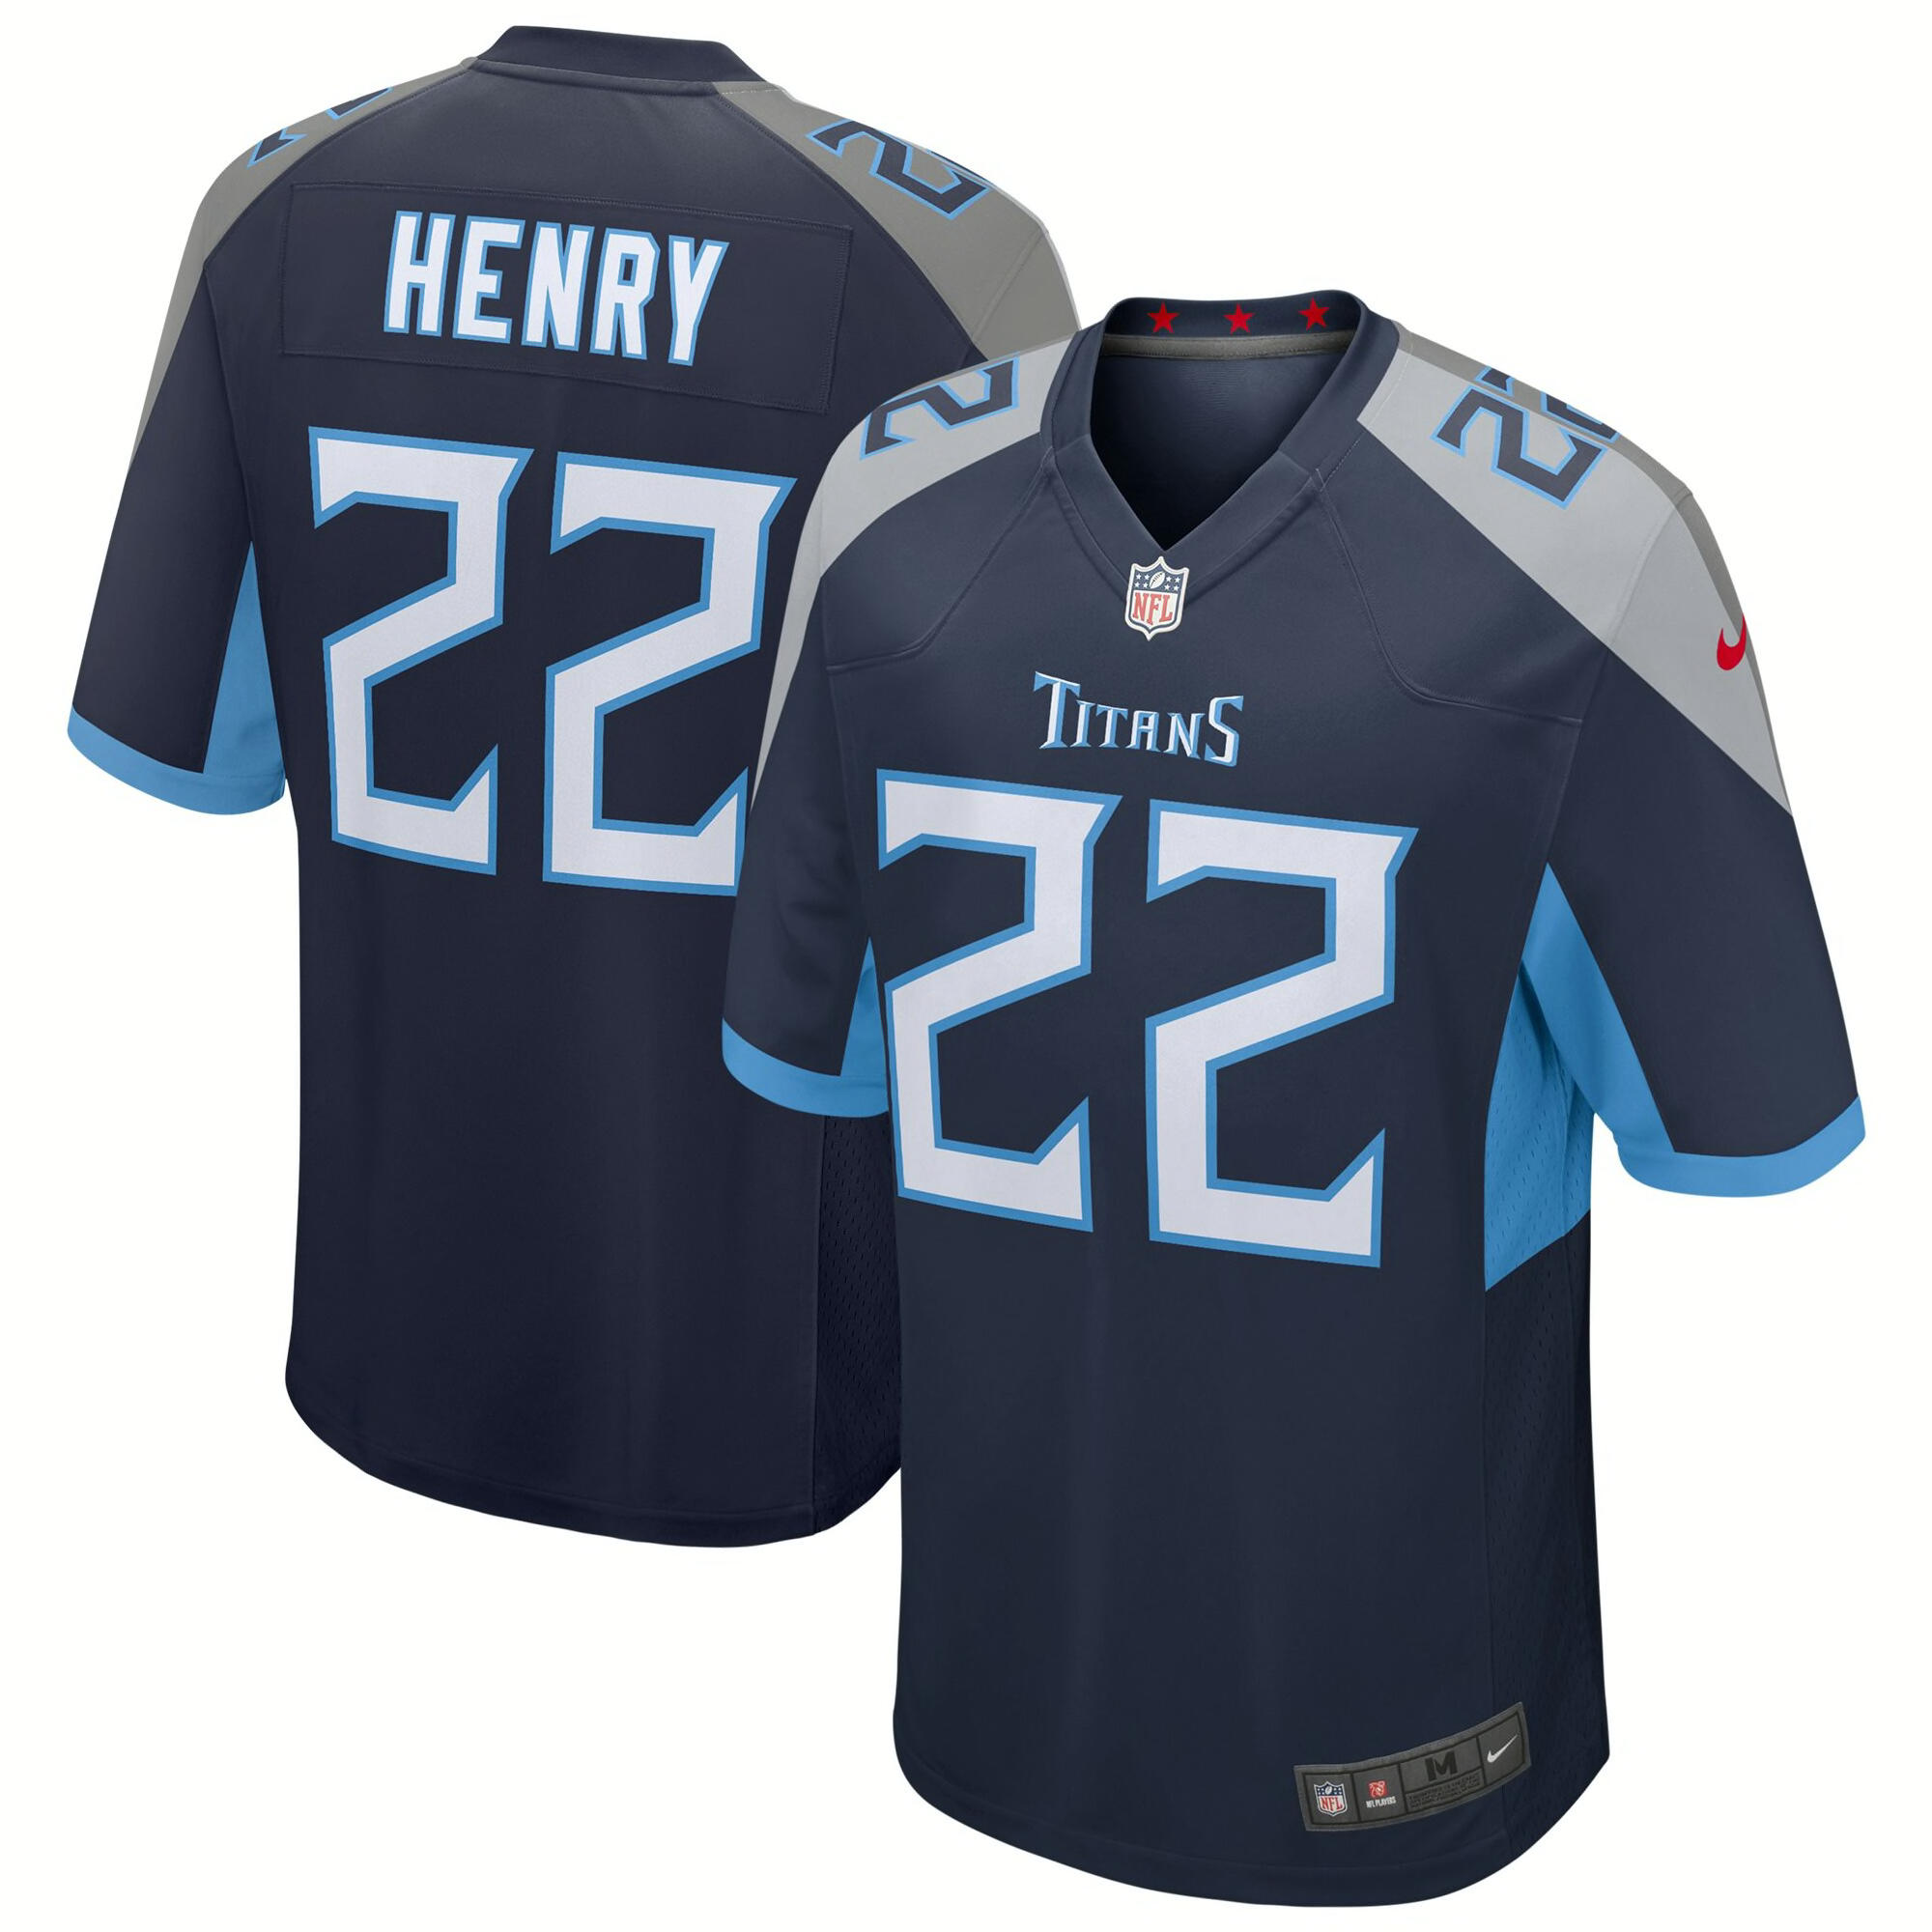 The Top 10 Best-Selling NFL Jerseys That You Need